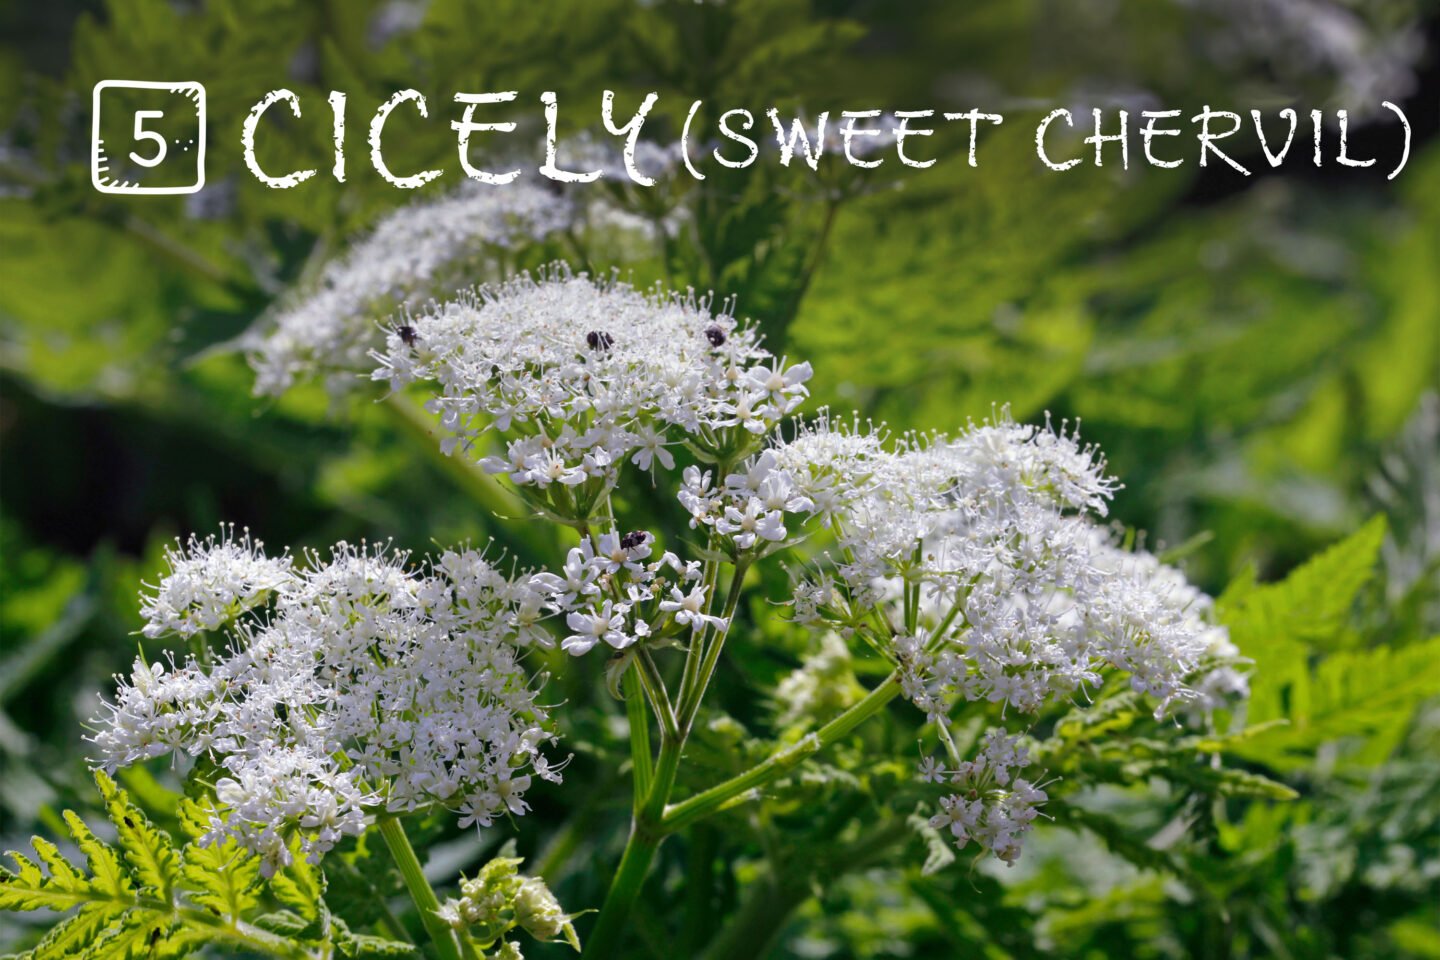 5 cicely or sweet chervil